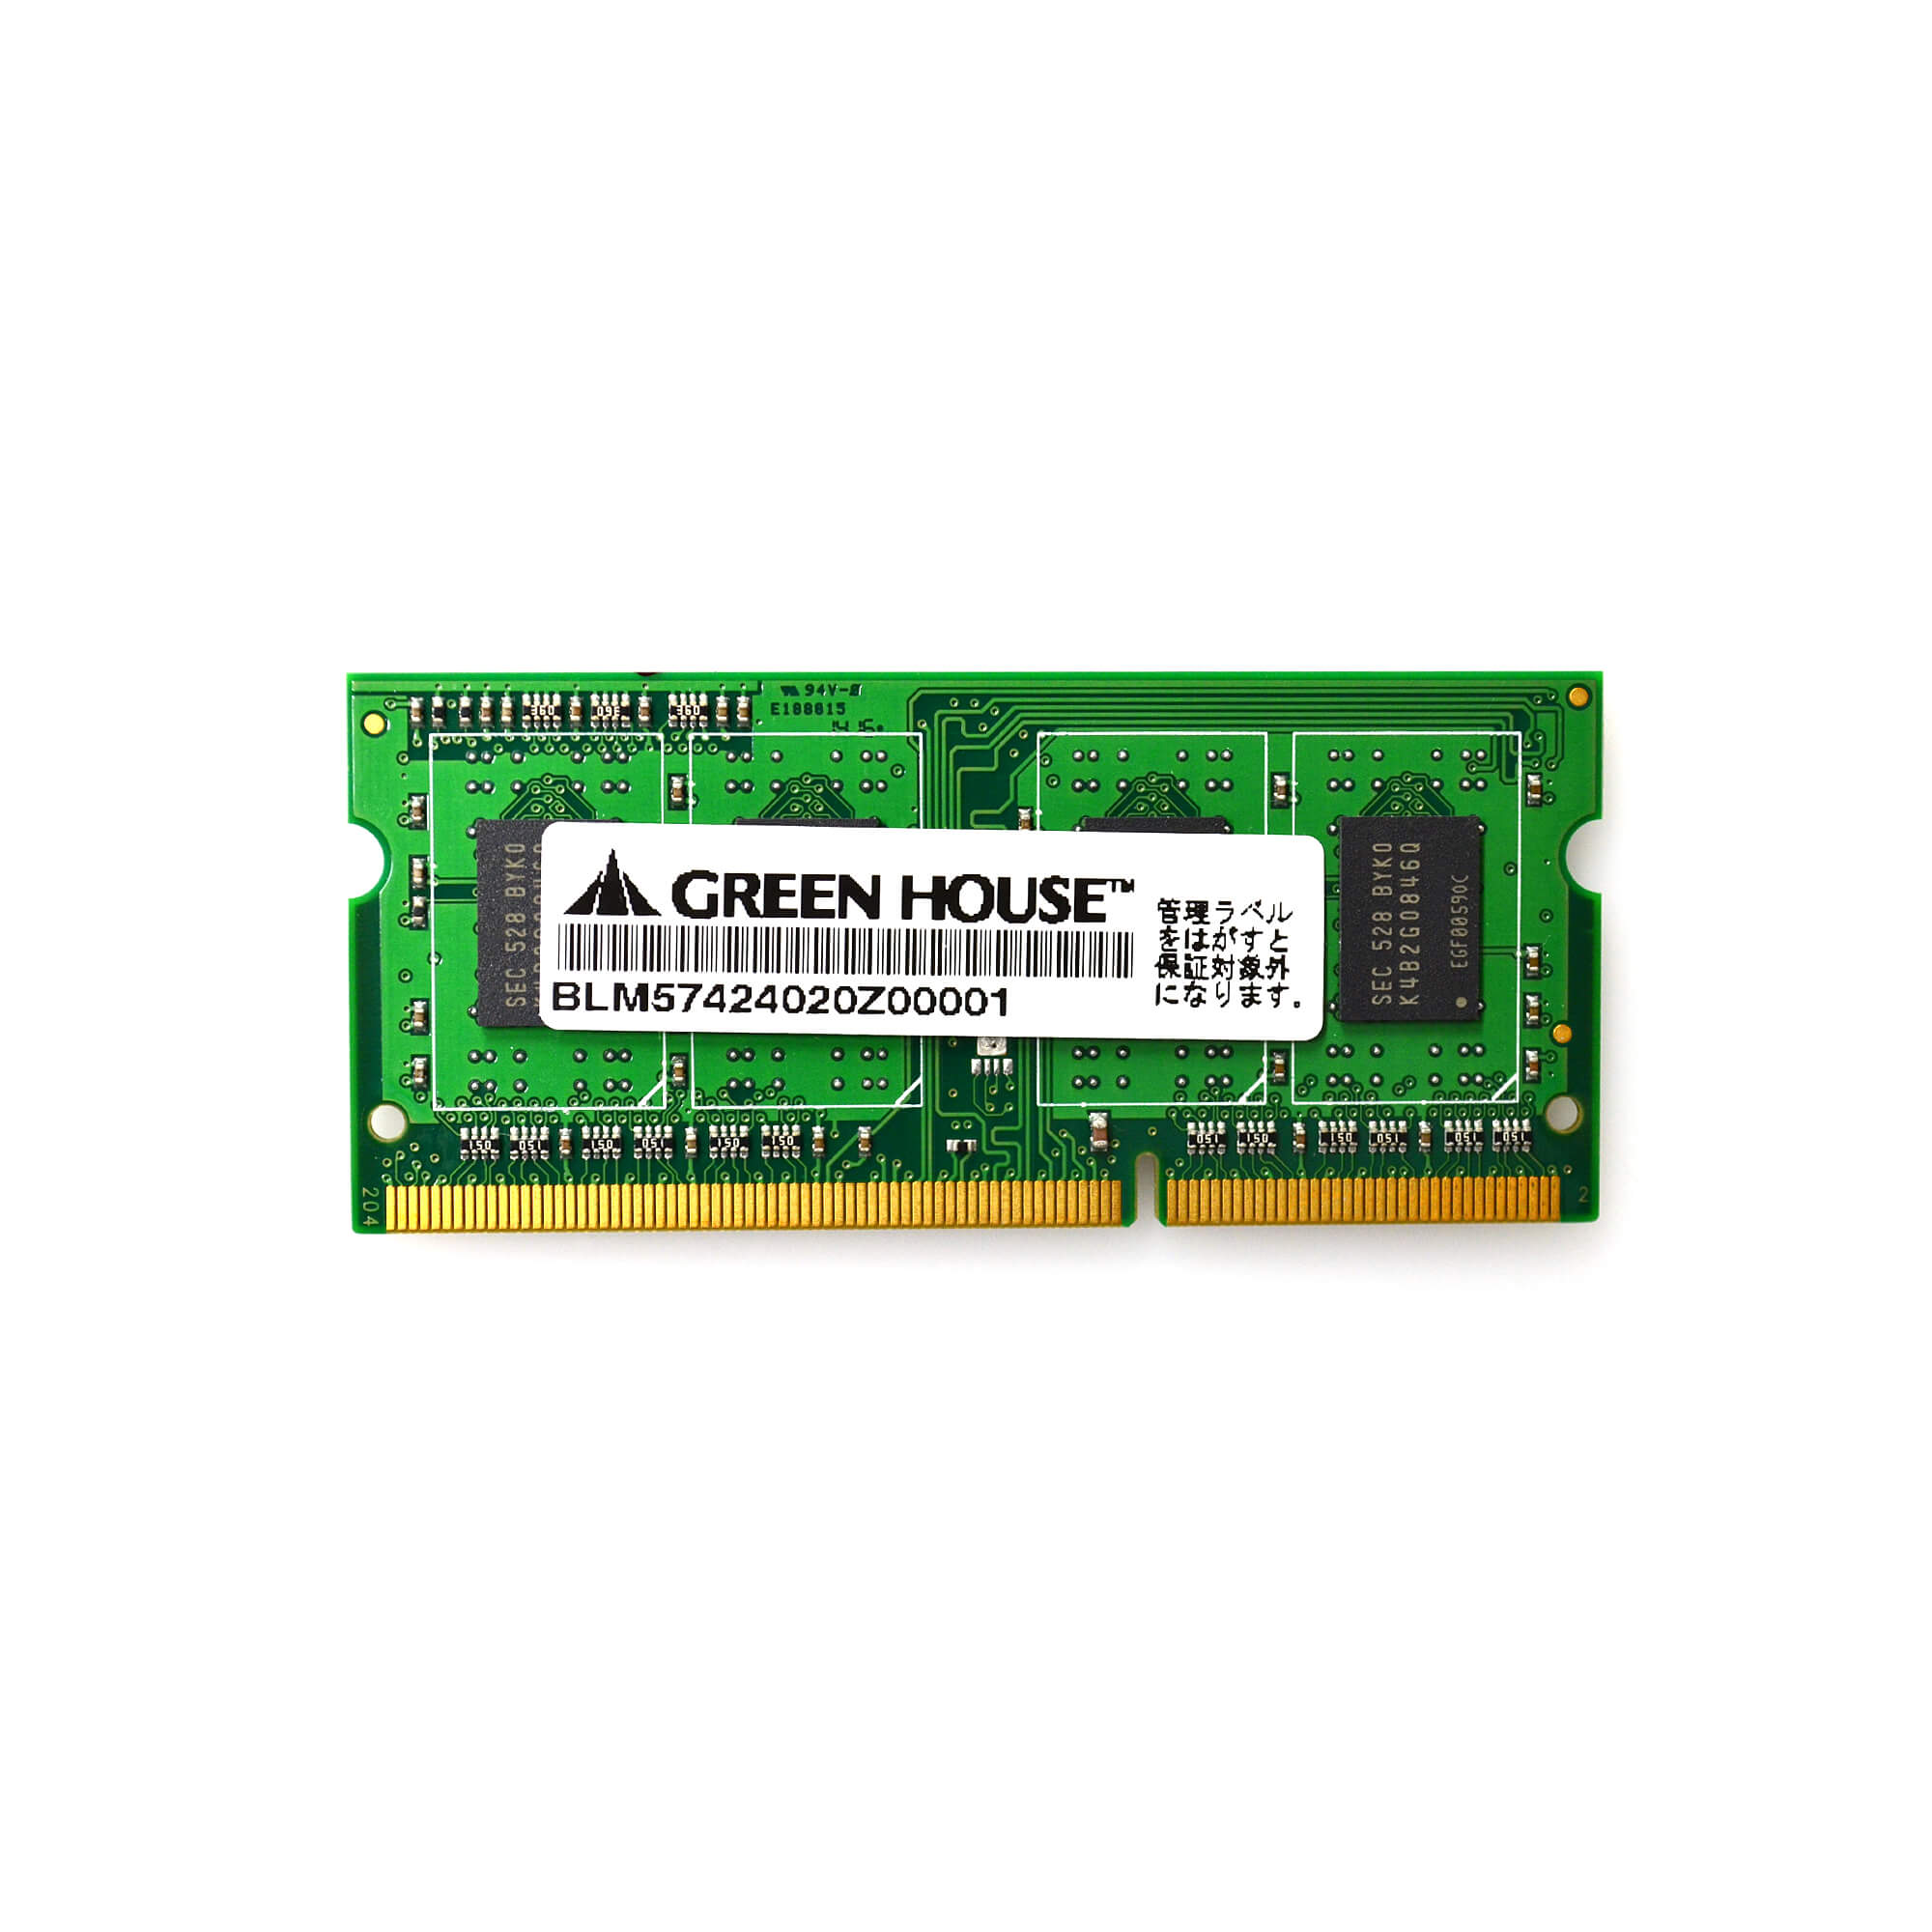 Memory (for Notebook PCs) GH-DWT1600LV Series